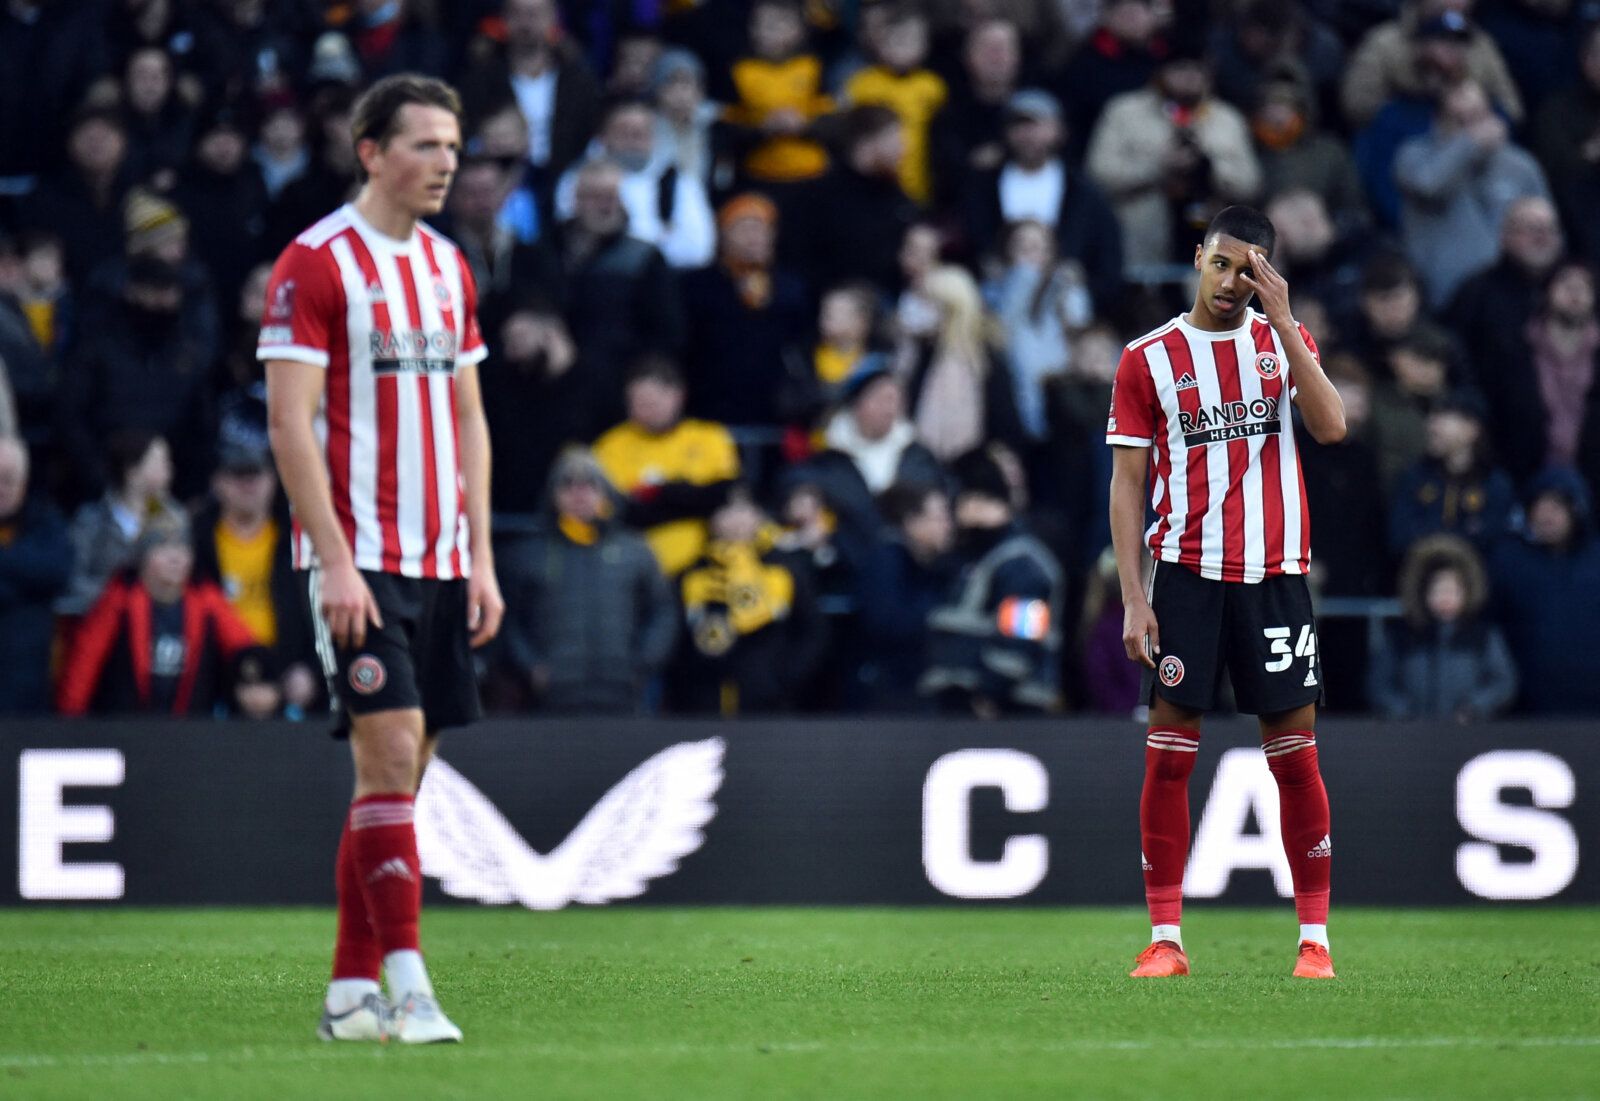 Soccer Football - FA Cup Third Round - Wolverhampton Wanderers v Sheffield United - Molineux Stadium, Wolverhampton, Britain - January 9, 2022 Sheffield United's Kyron Gordon looks dejected after Wolverhampton Wanderers' Nelson Semedo scores their second goal REUTERS/Peter Powell